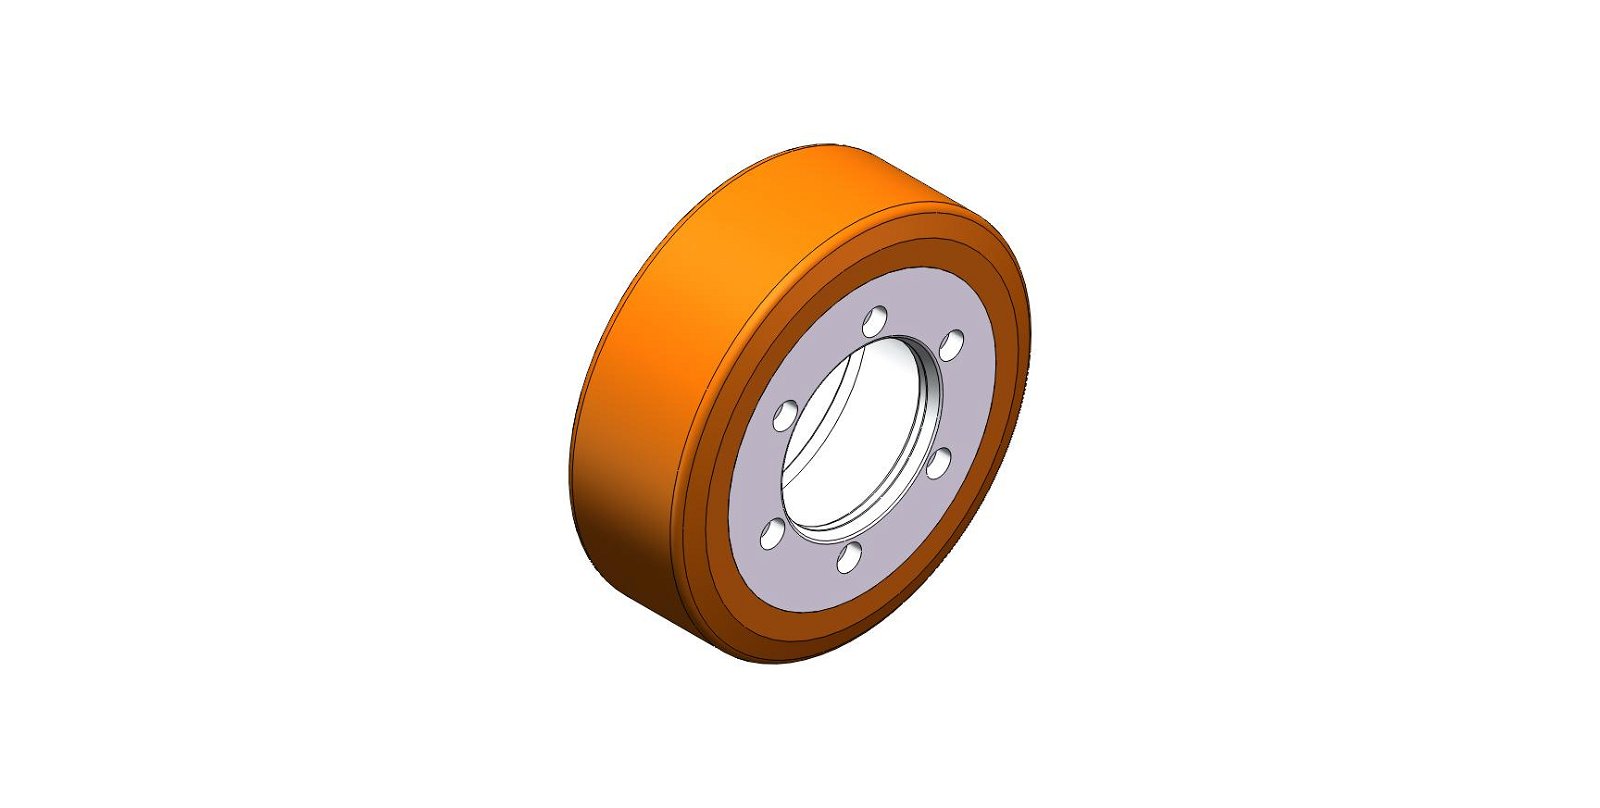 200x50mm robot drive wheel for AGV high quality OEM ODM available 4